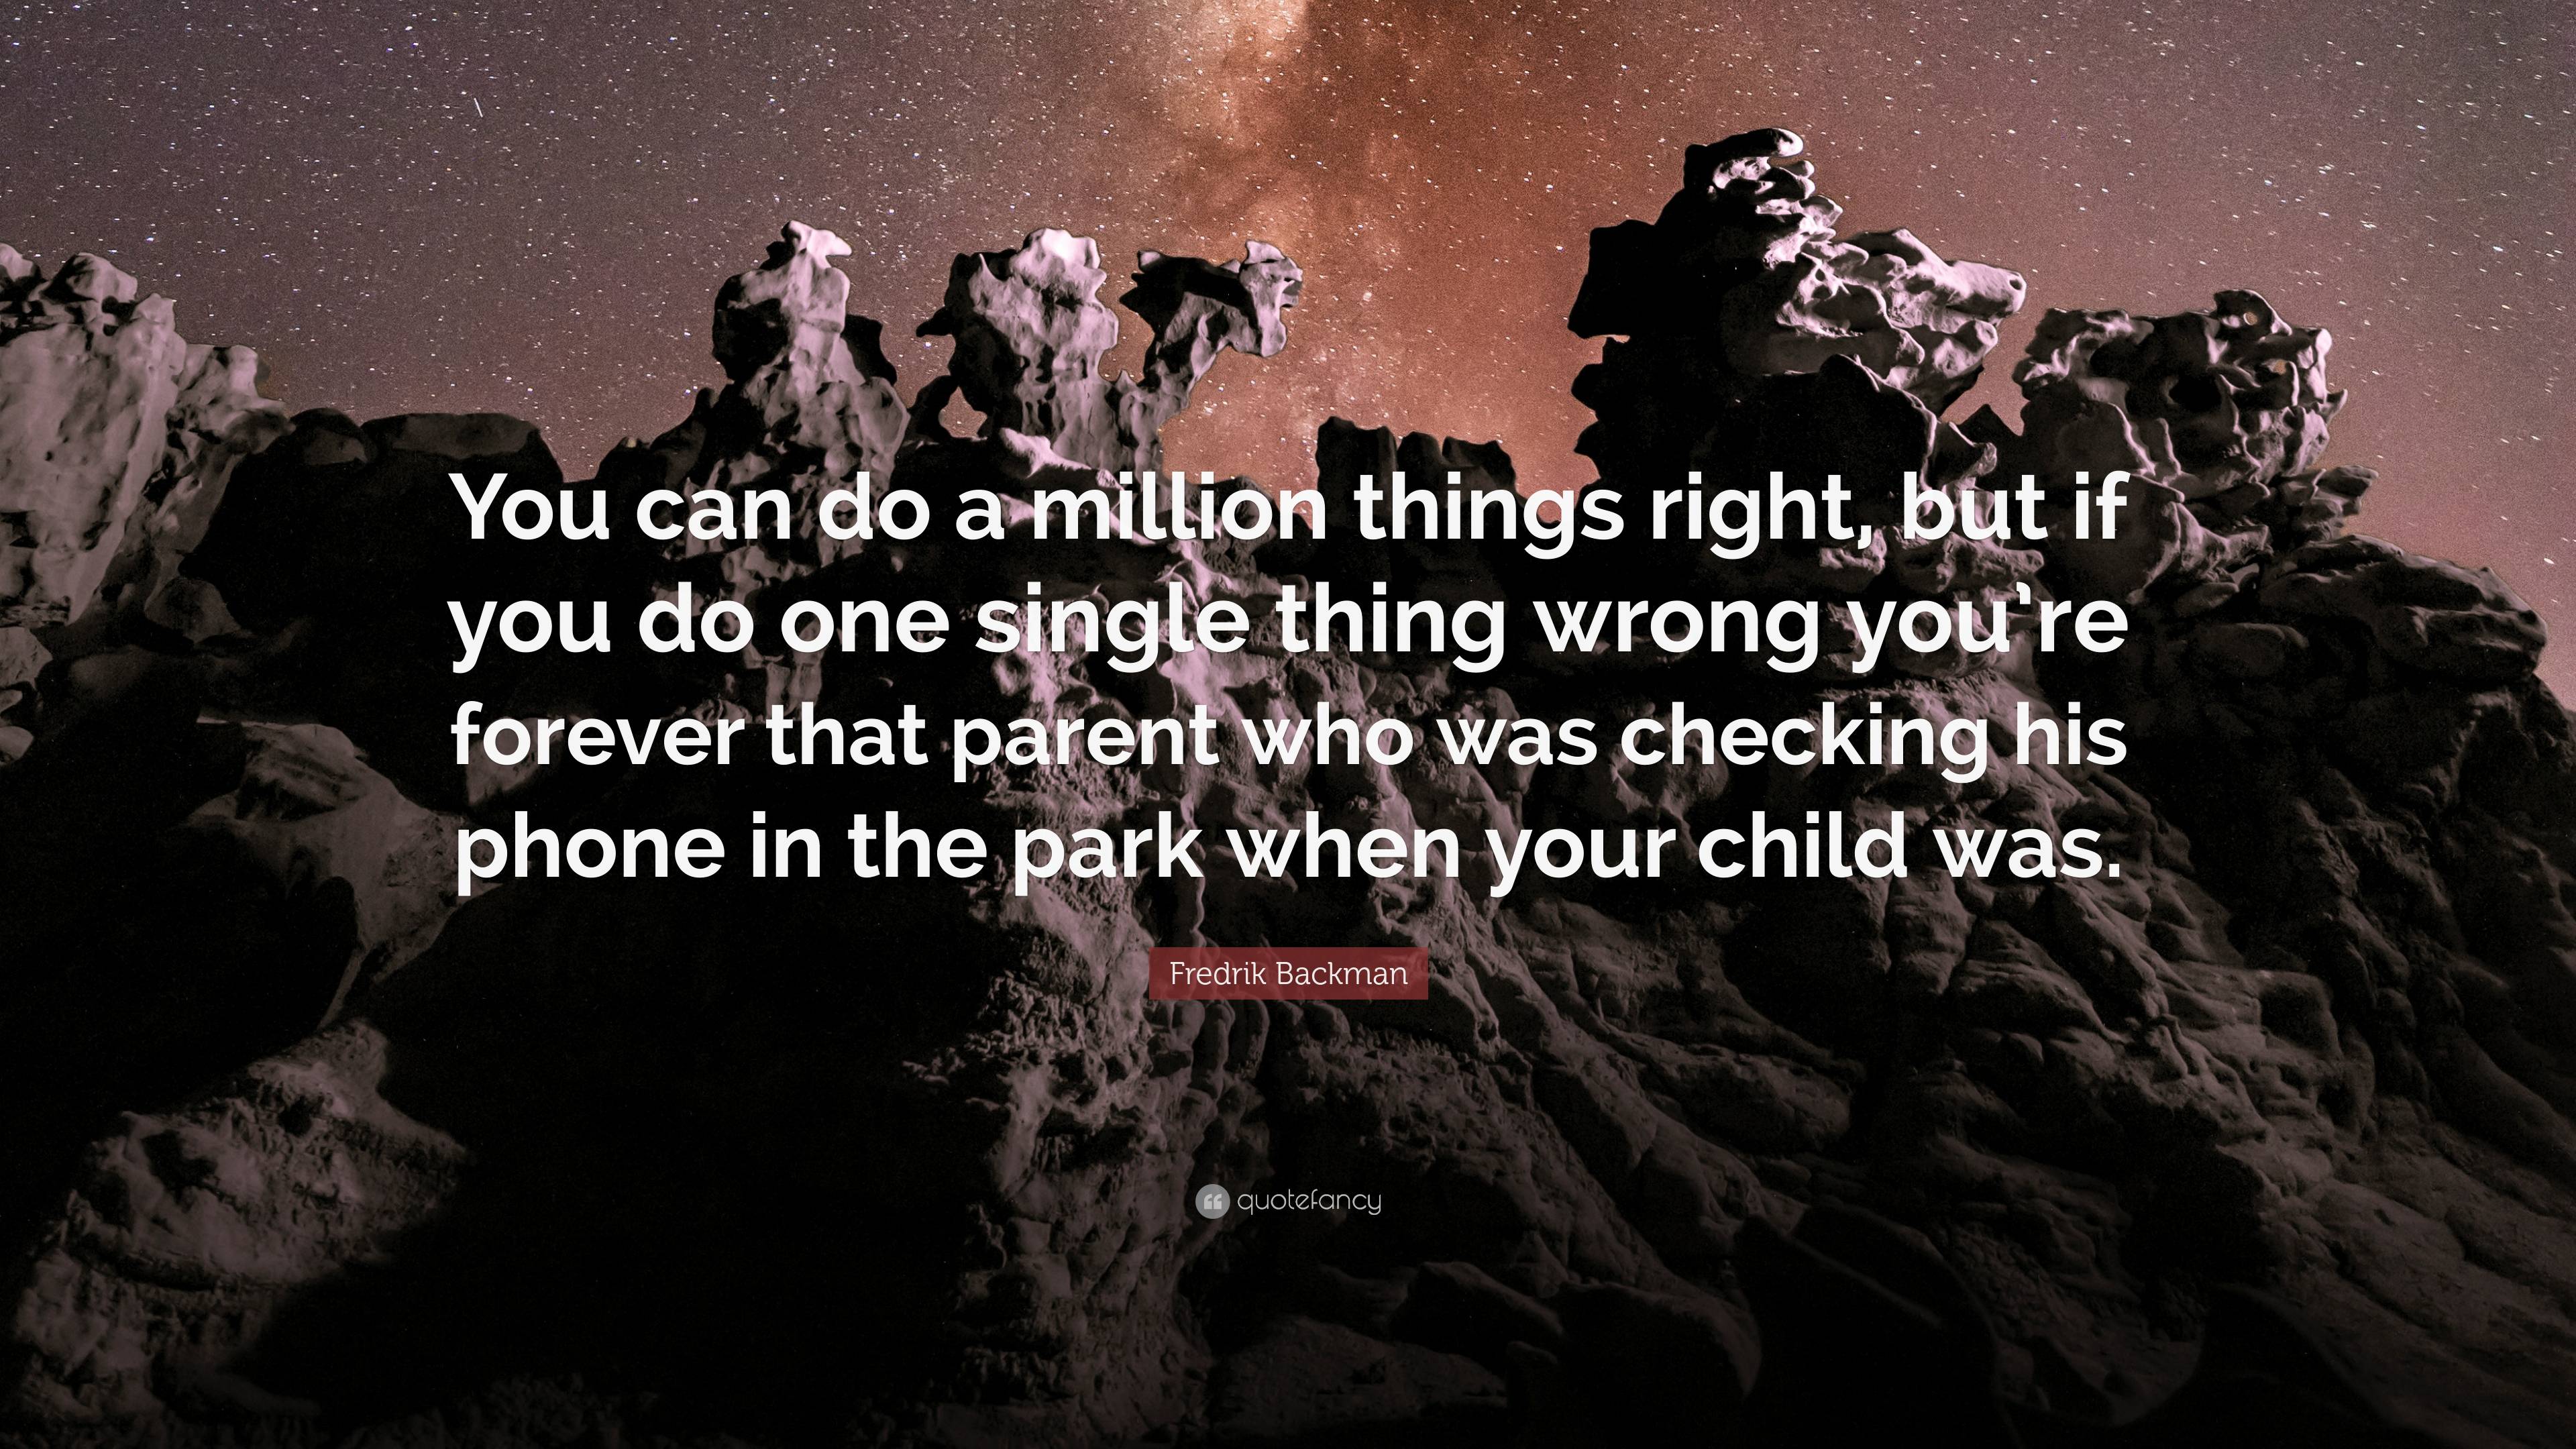 Fredrik Backman Quote: “You can do a million things right, but if you ...